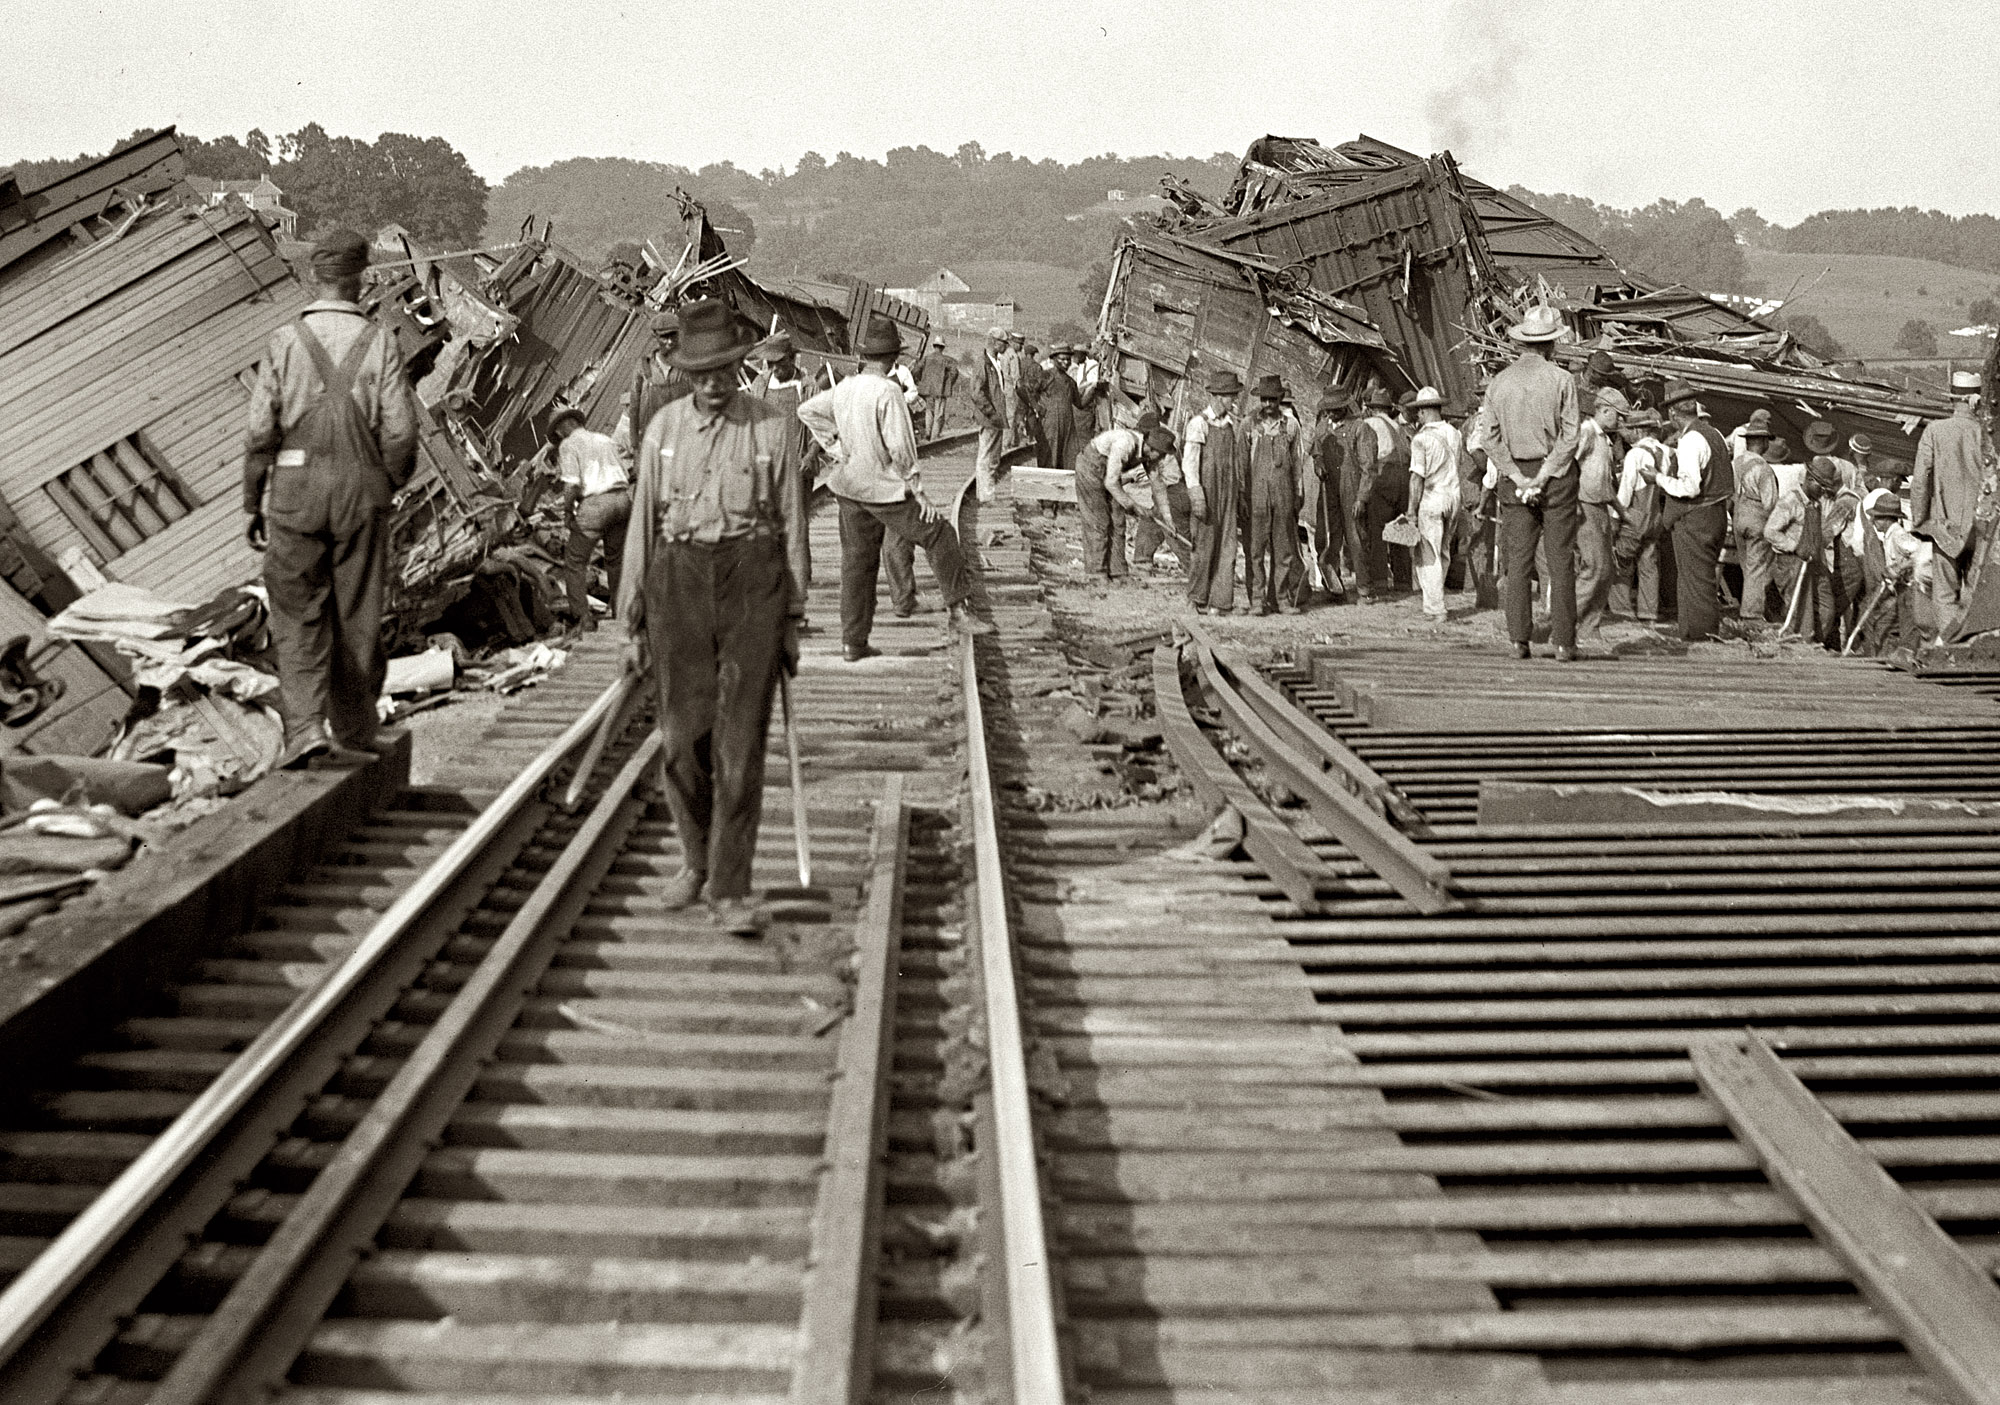 July 20, 1926. "Train wreck at Cameron Run." A 35-car derailment in Virginia. View full size. National Photo Company Collection glass negative.